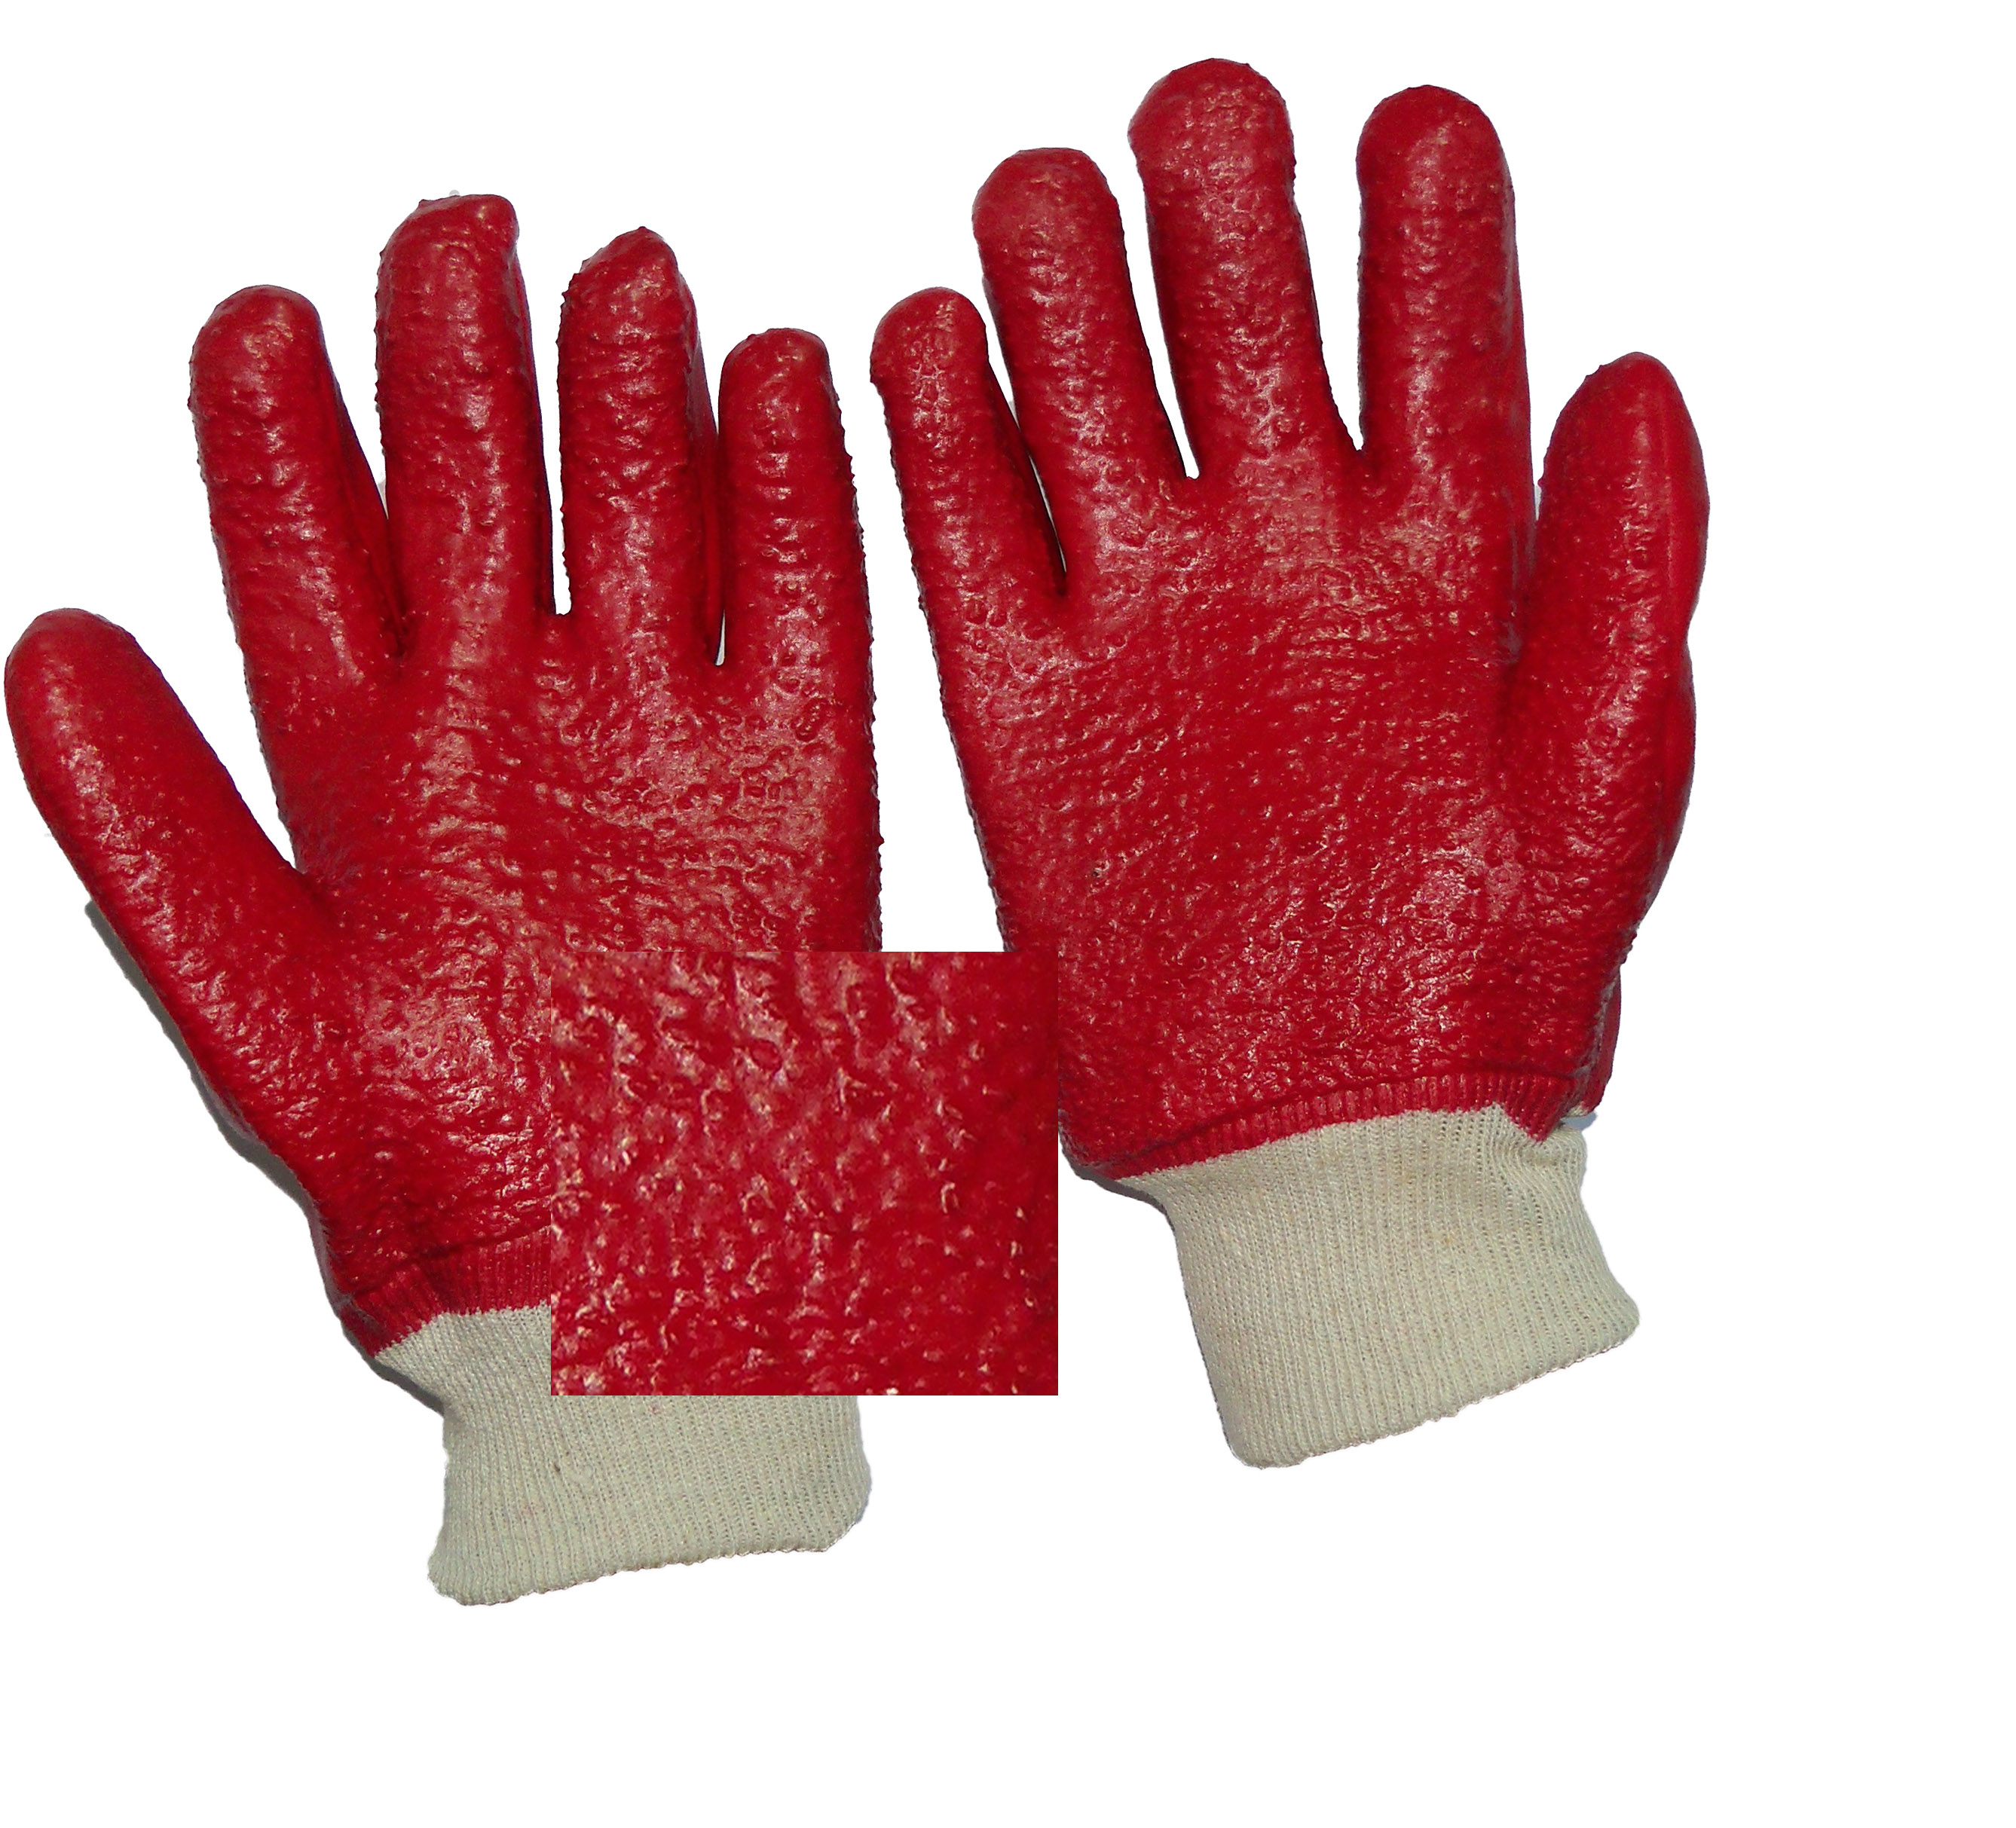 Red PVC fully dipped working gloves